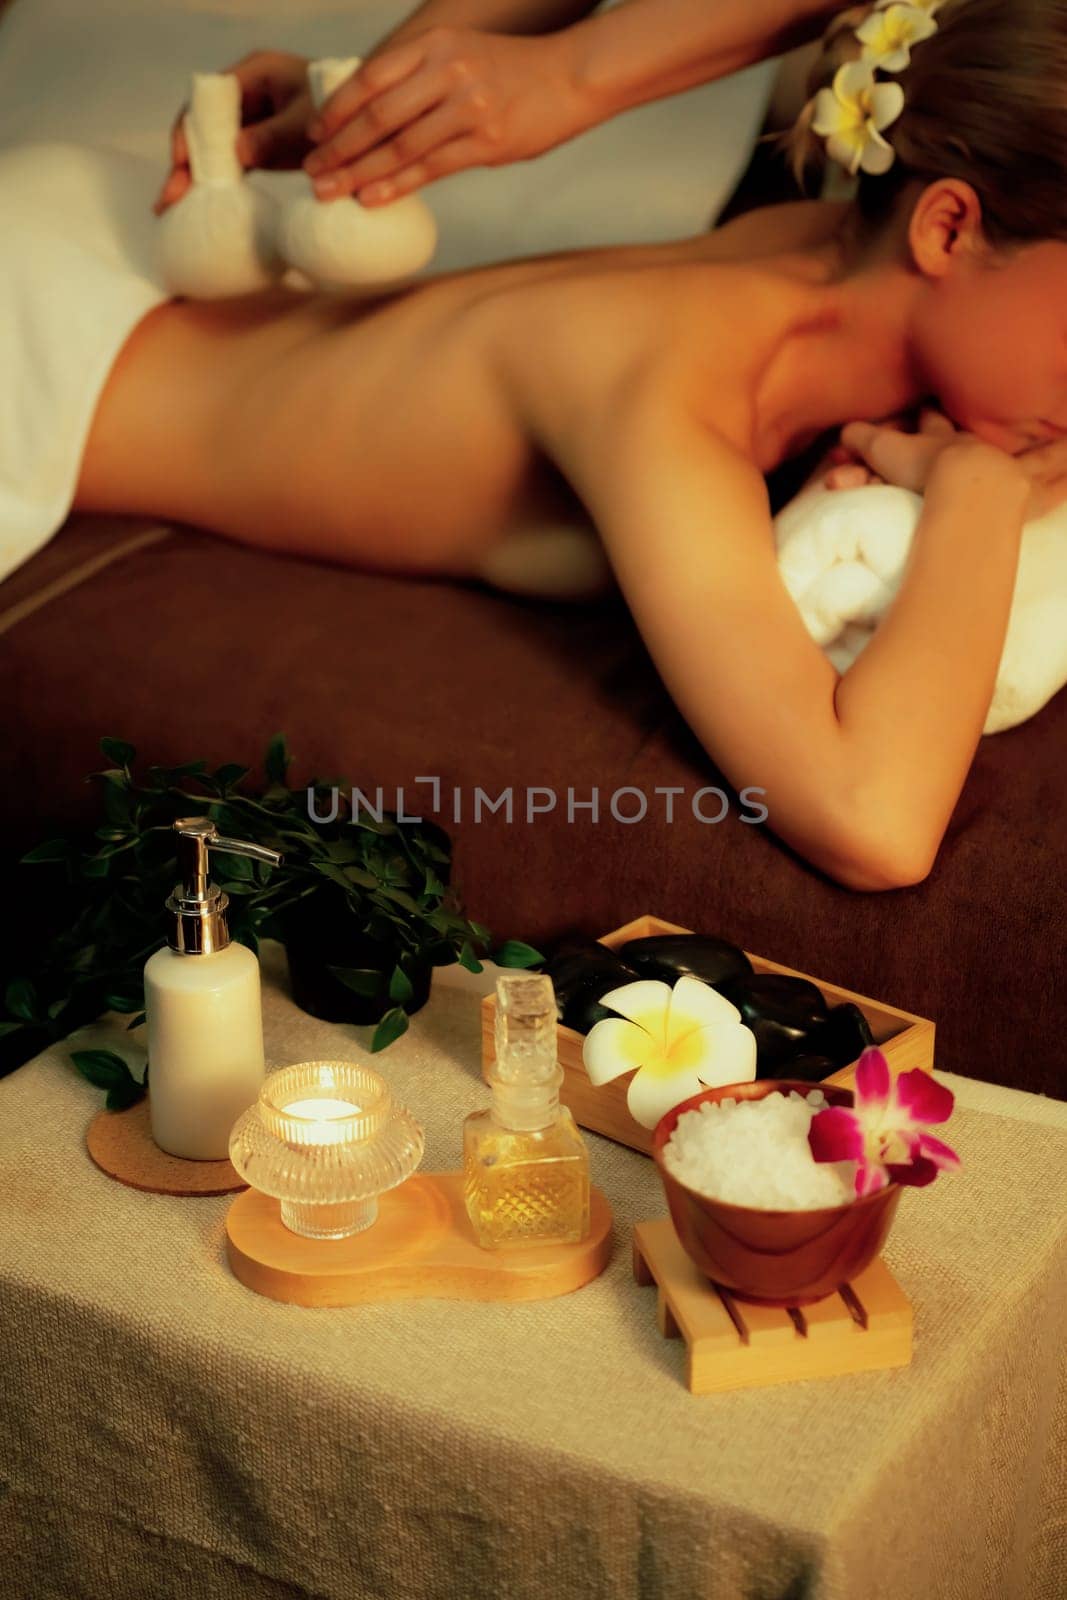 Hot herbal ball spa massage body treatment. Quiescent by biancoblue